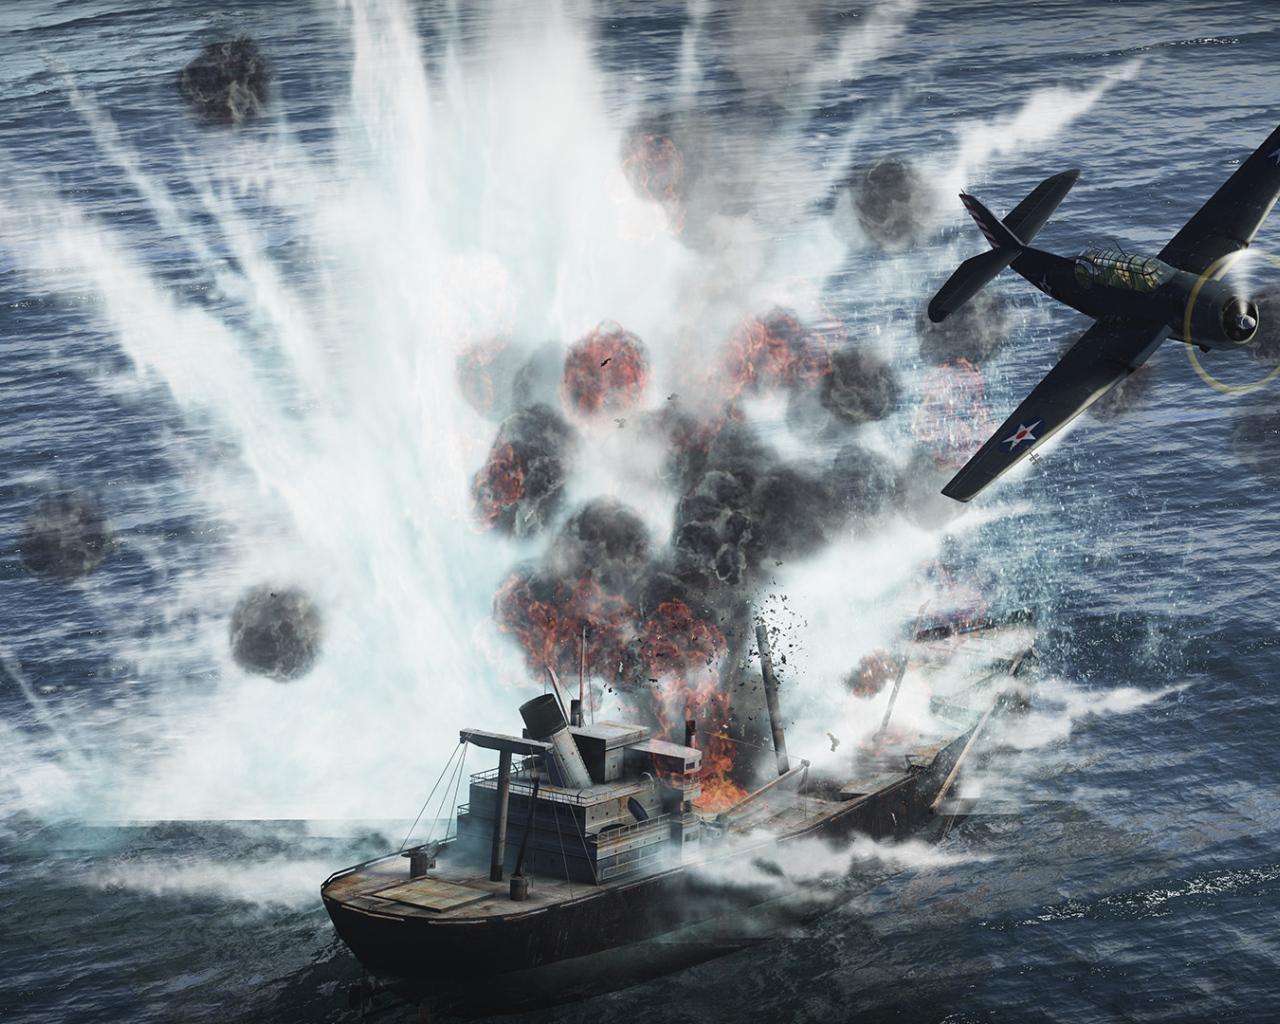 War Thunder the ship took the hit